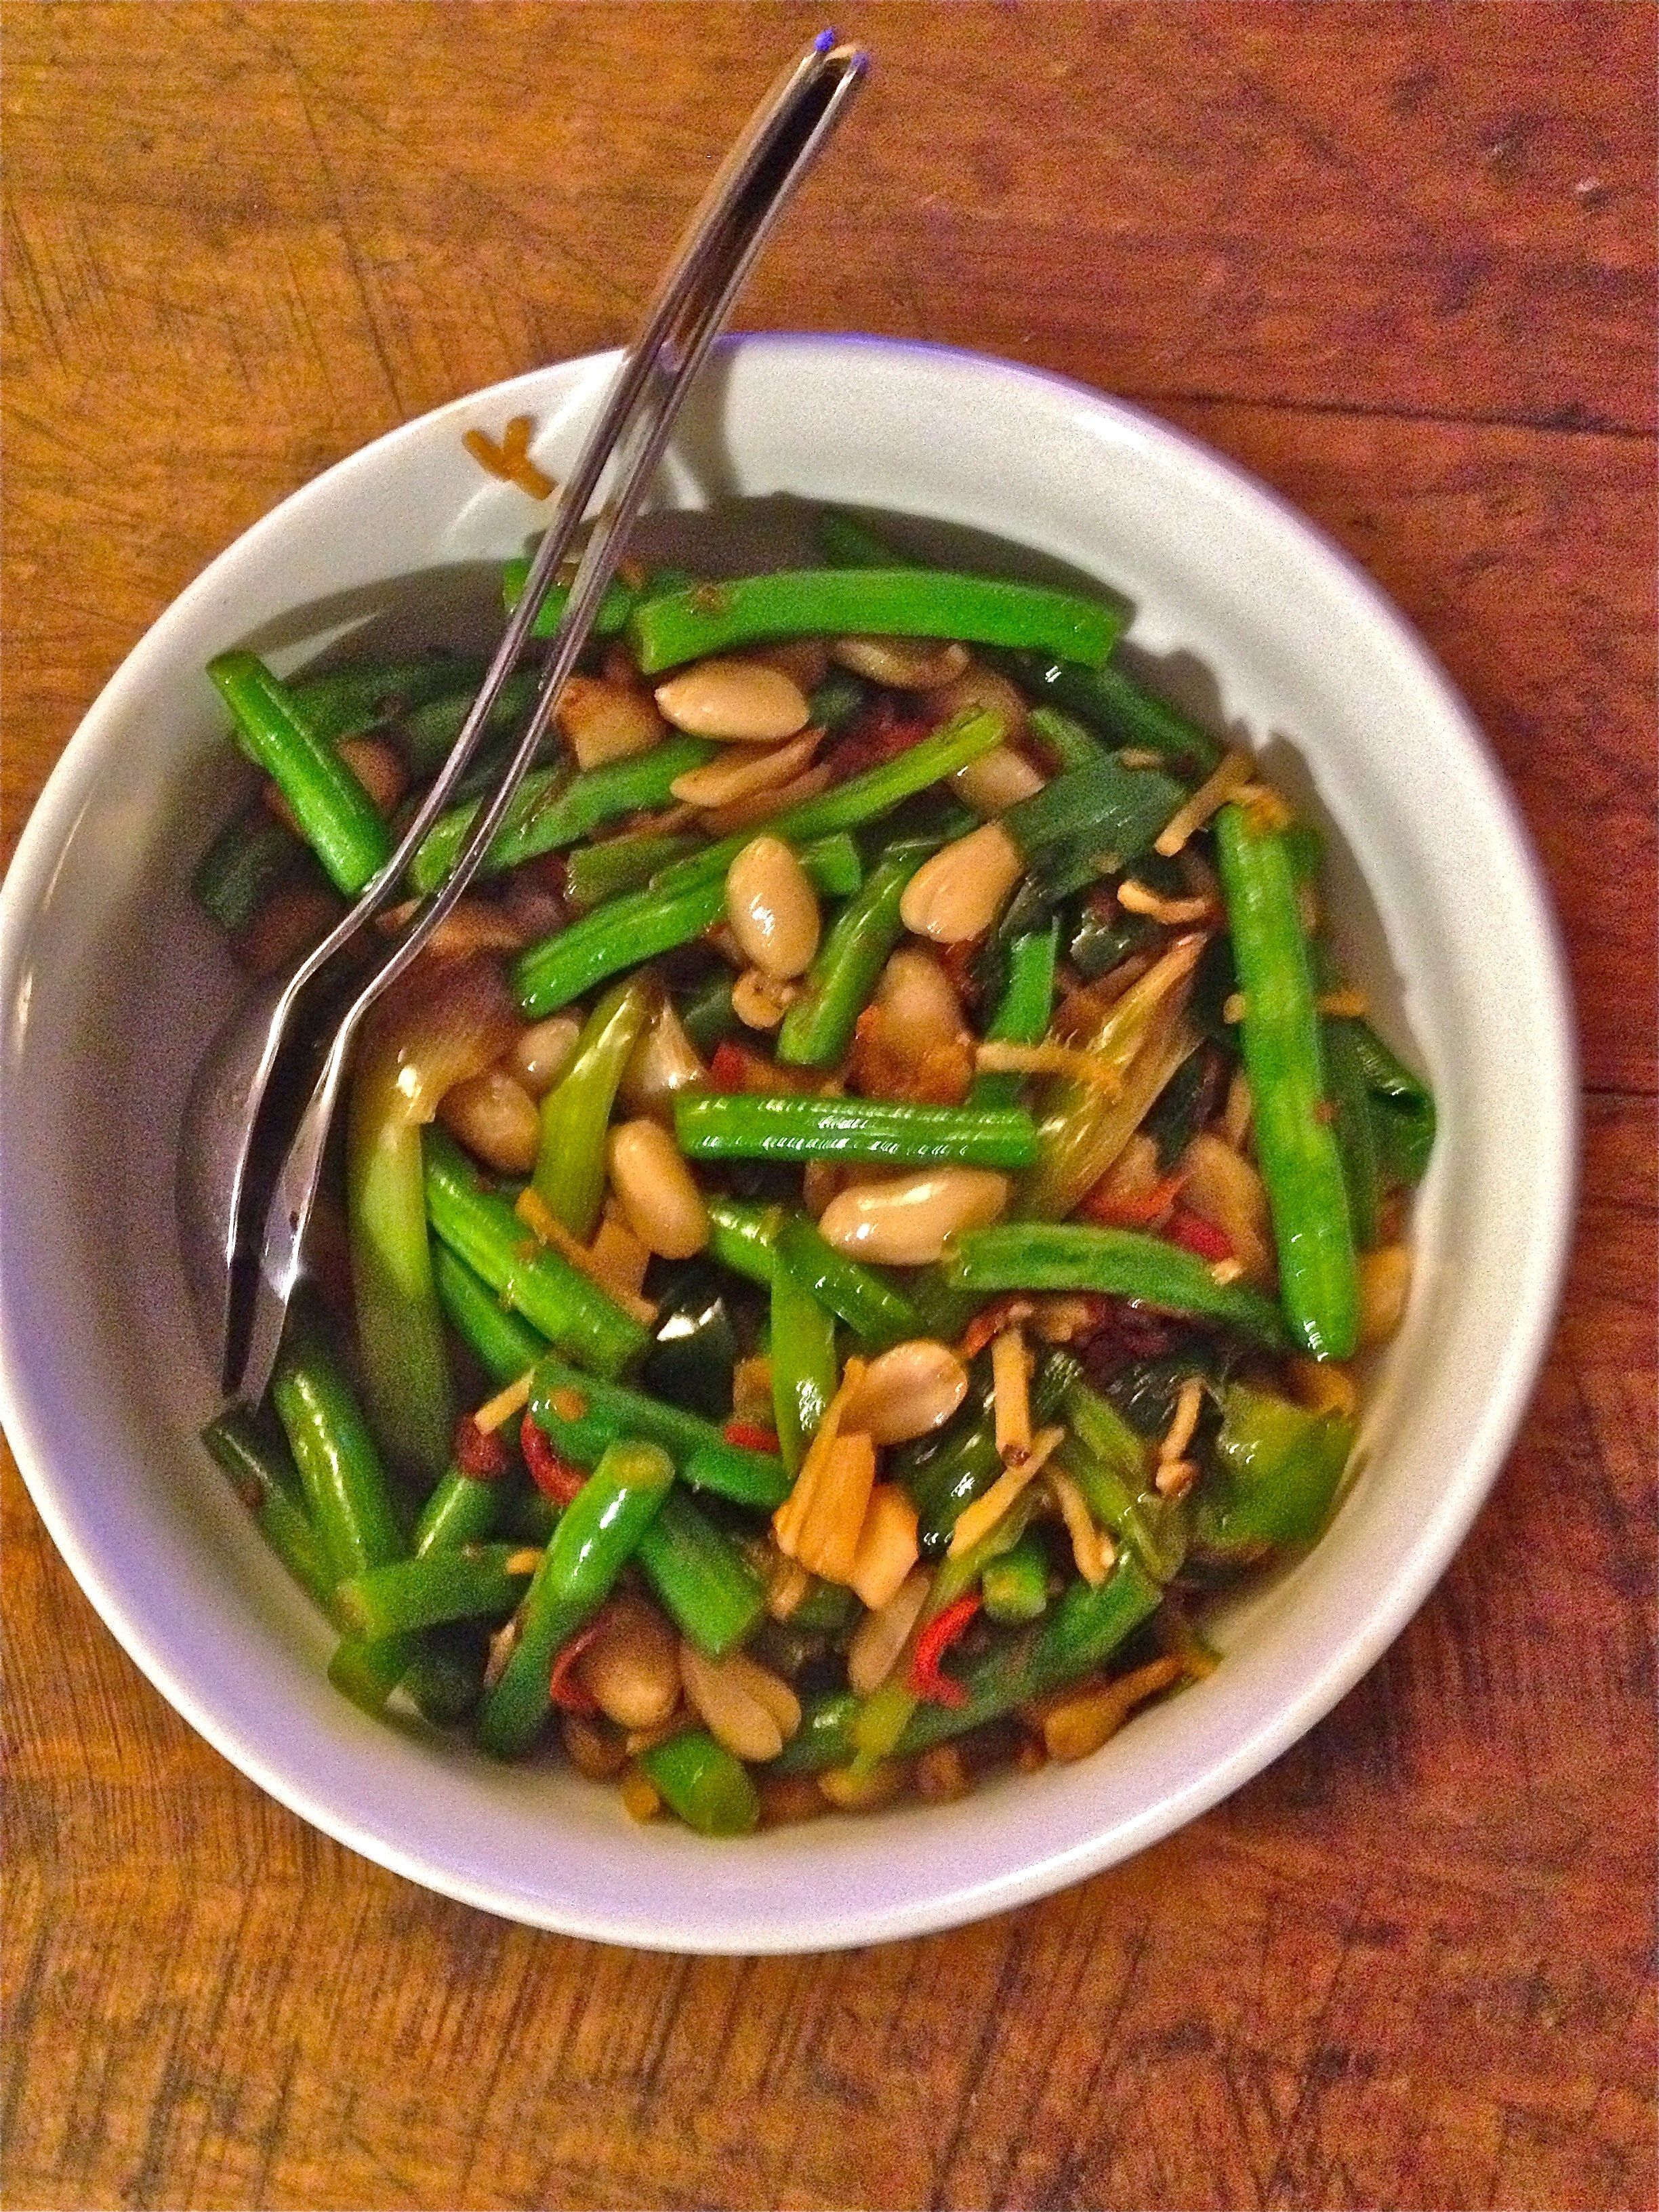 Manager reccomend Asian style green beans